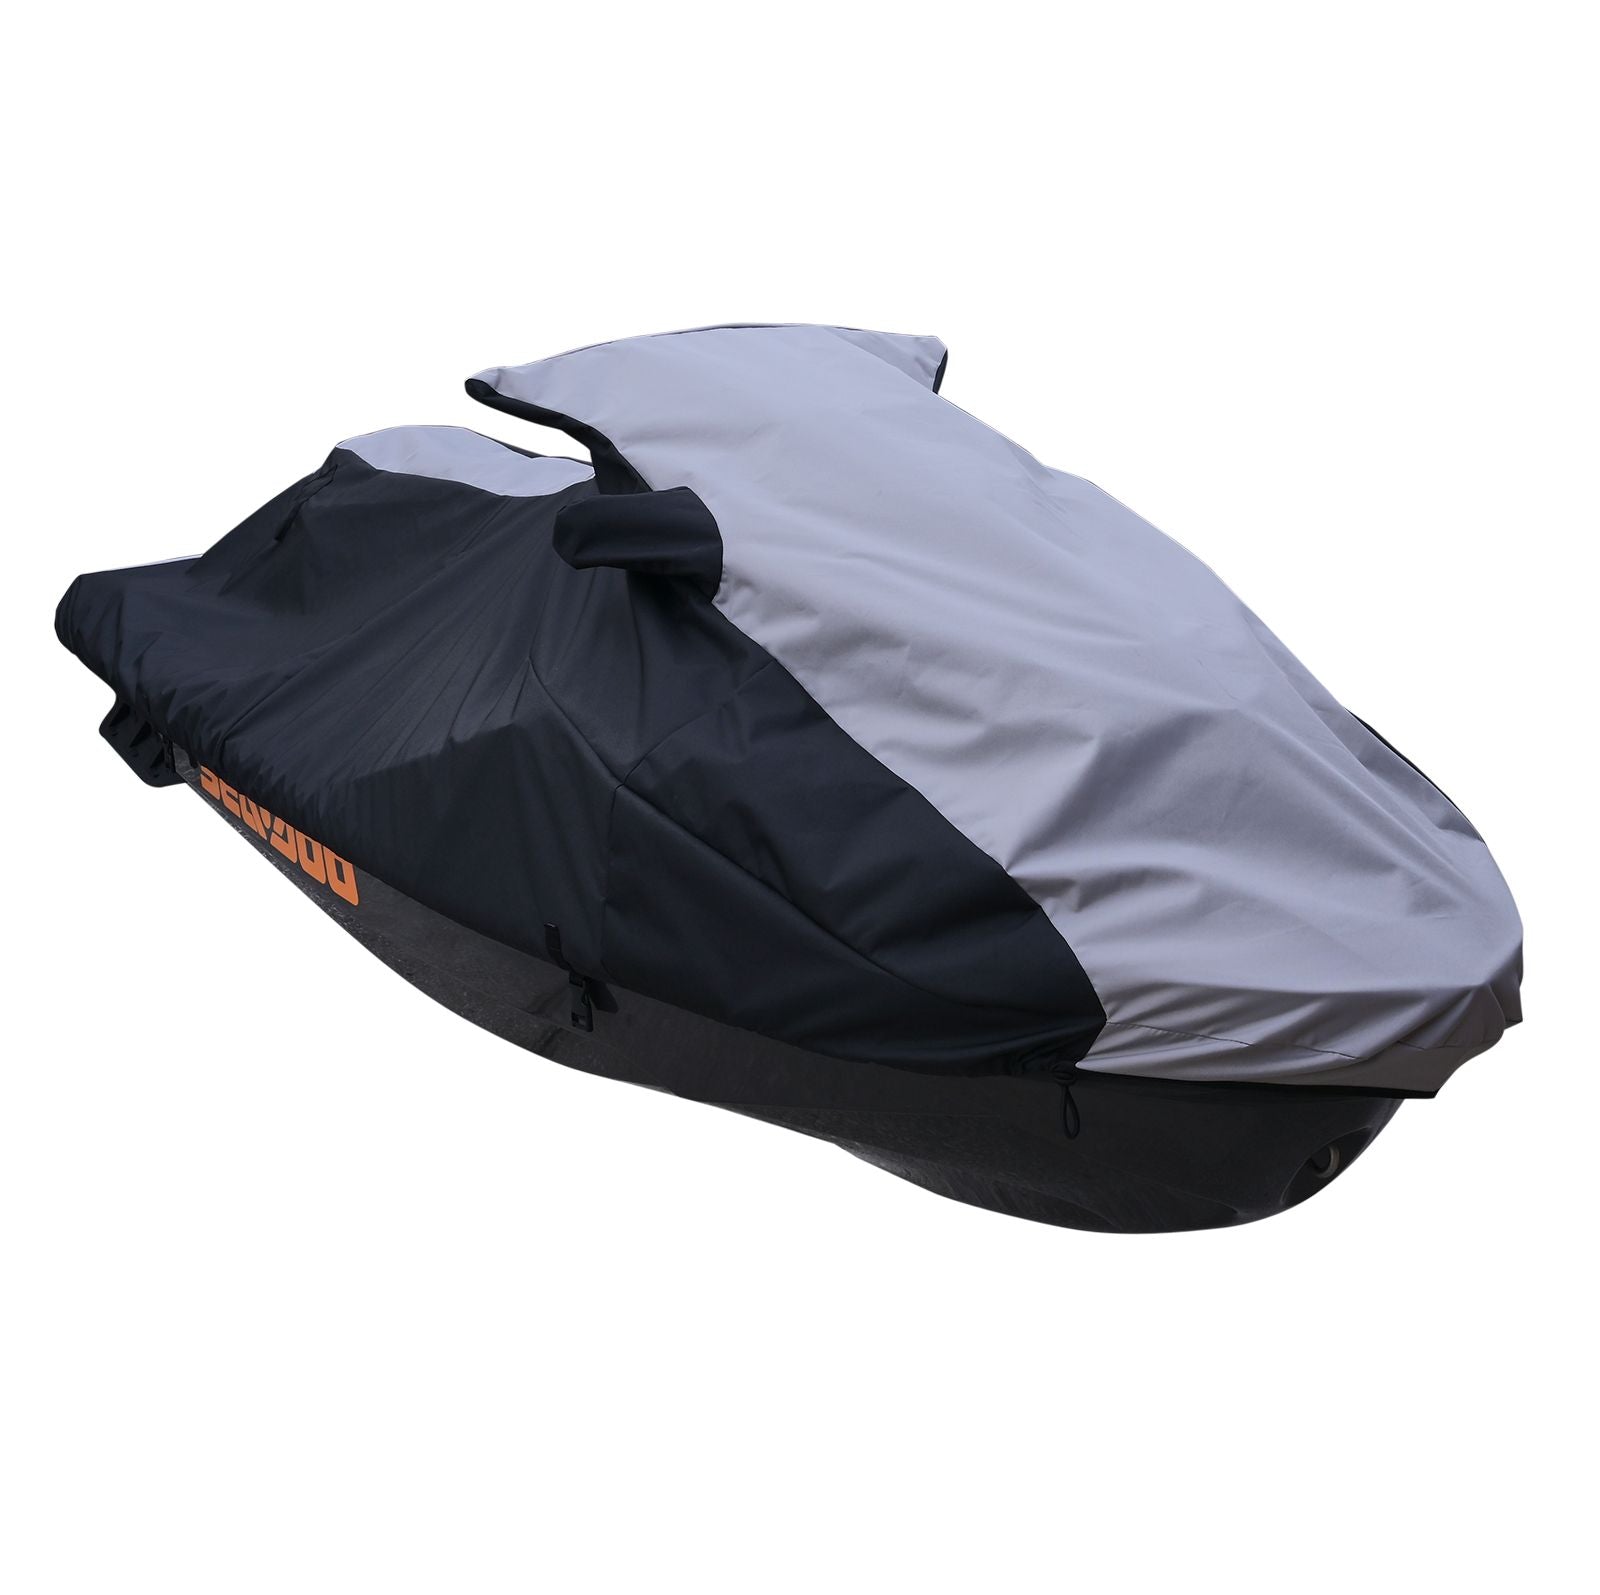 Trailerable Storage cover with vents for Sea-Doo 1993-1994 SPX / 1993-1999 SP, SPI